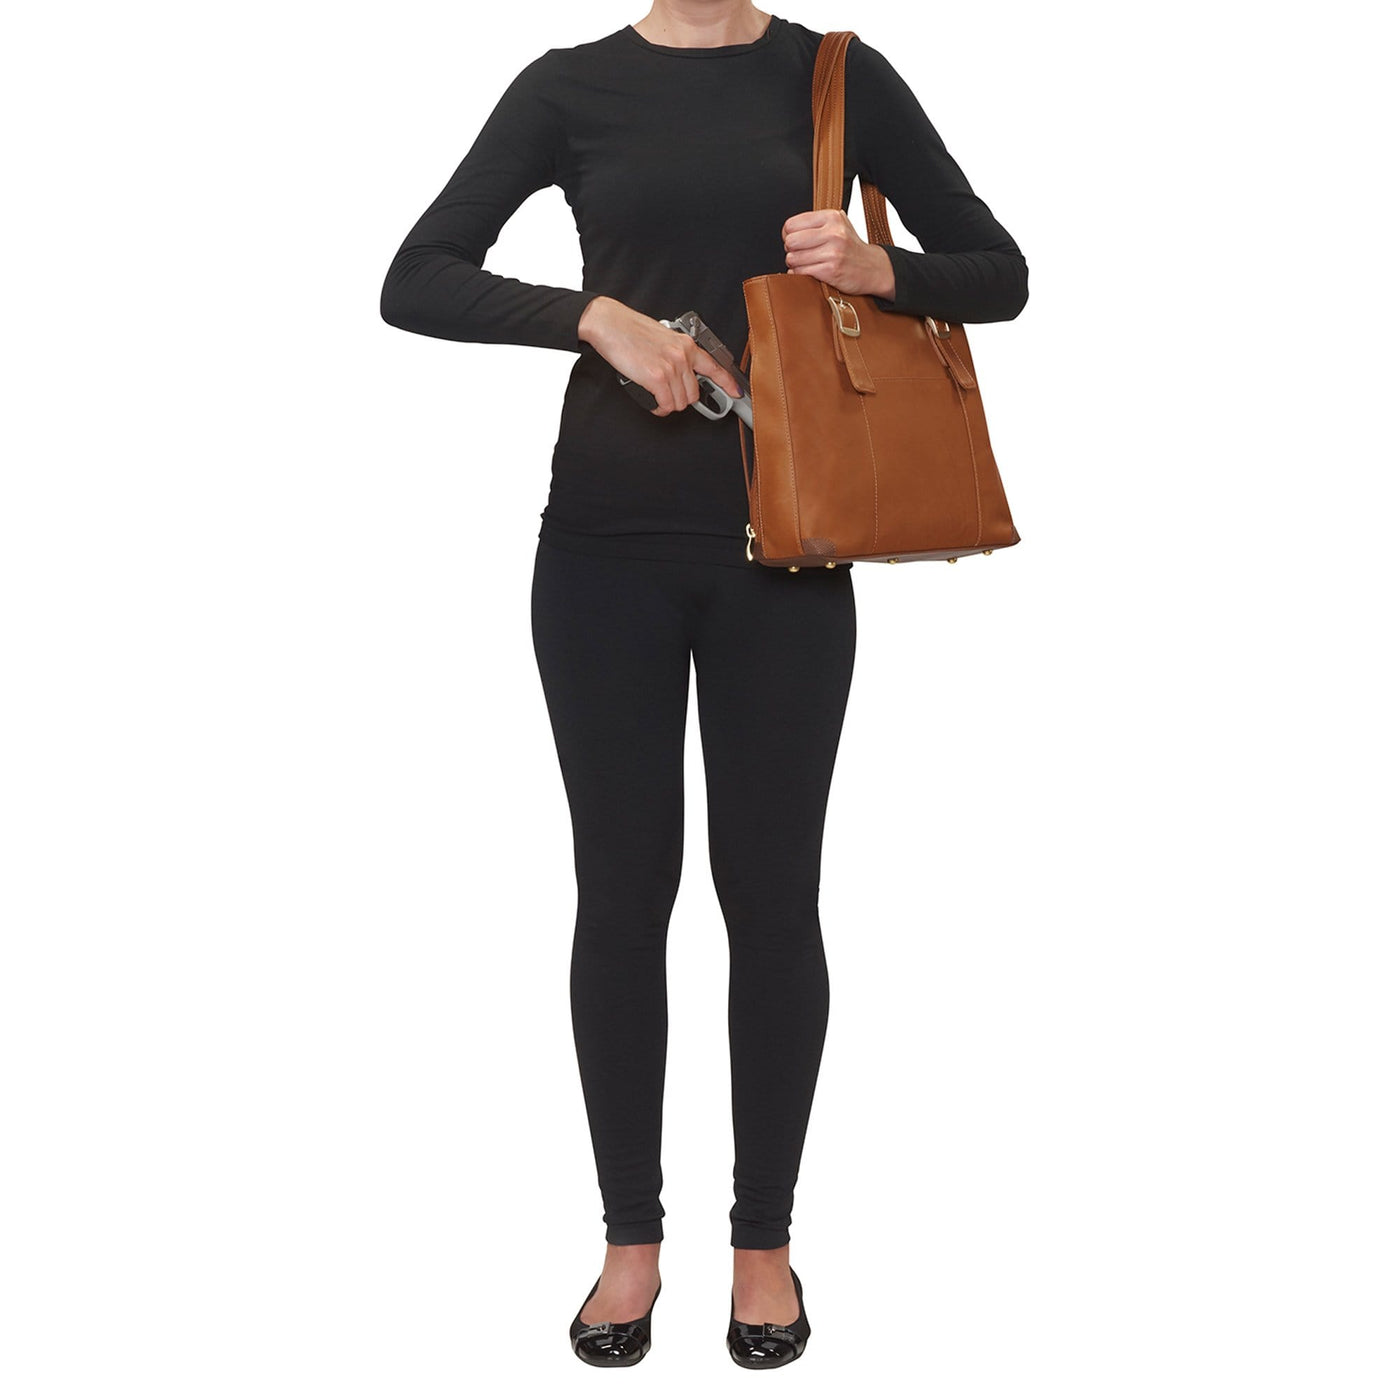 Gun Tote'n Mamas Concealed Carry Purse Brown Concealed Carry Shoulder Portfolio - GTM-1018